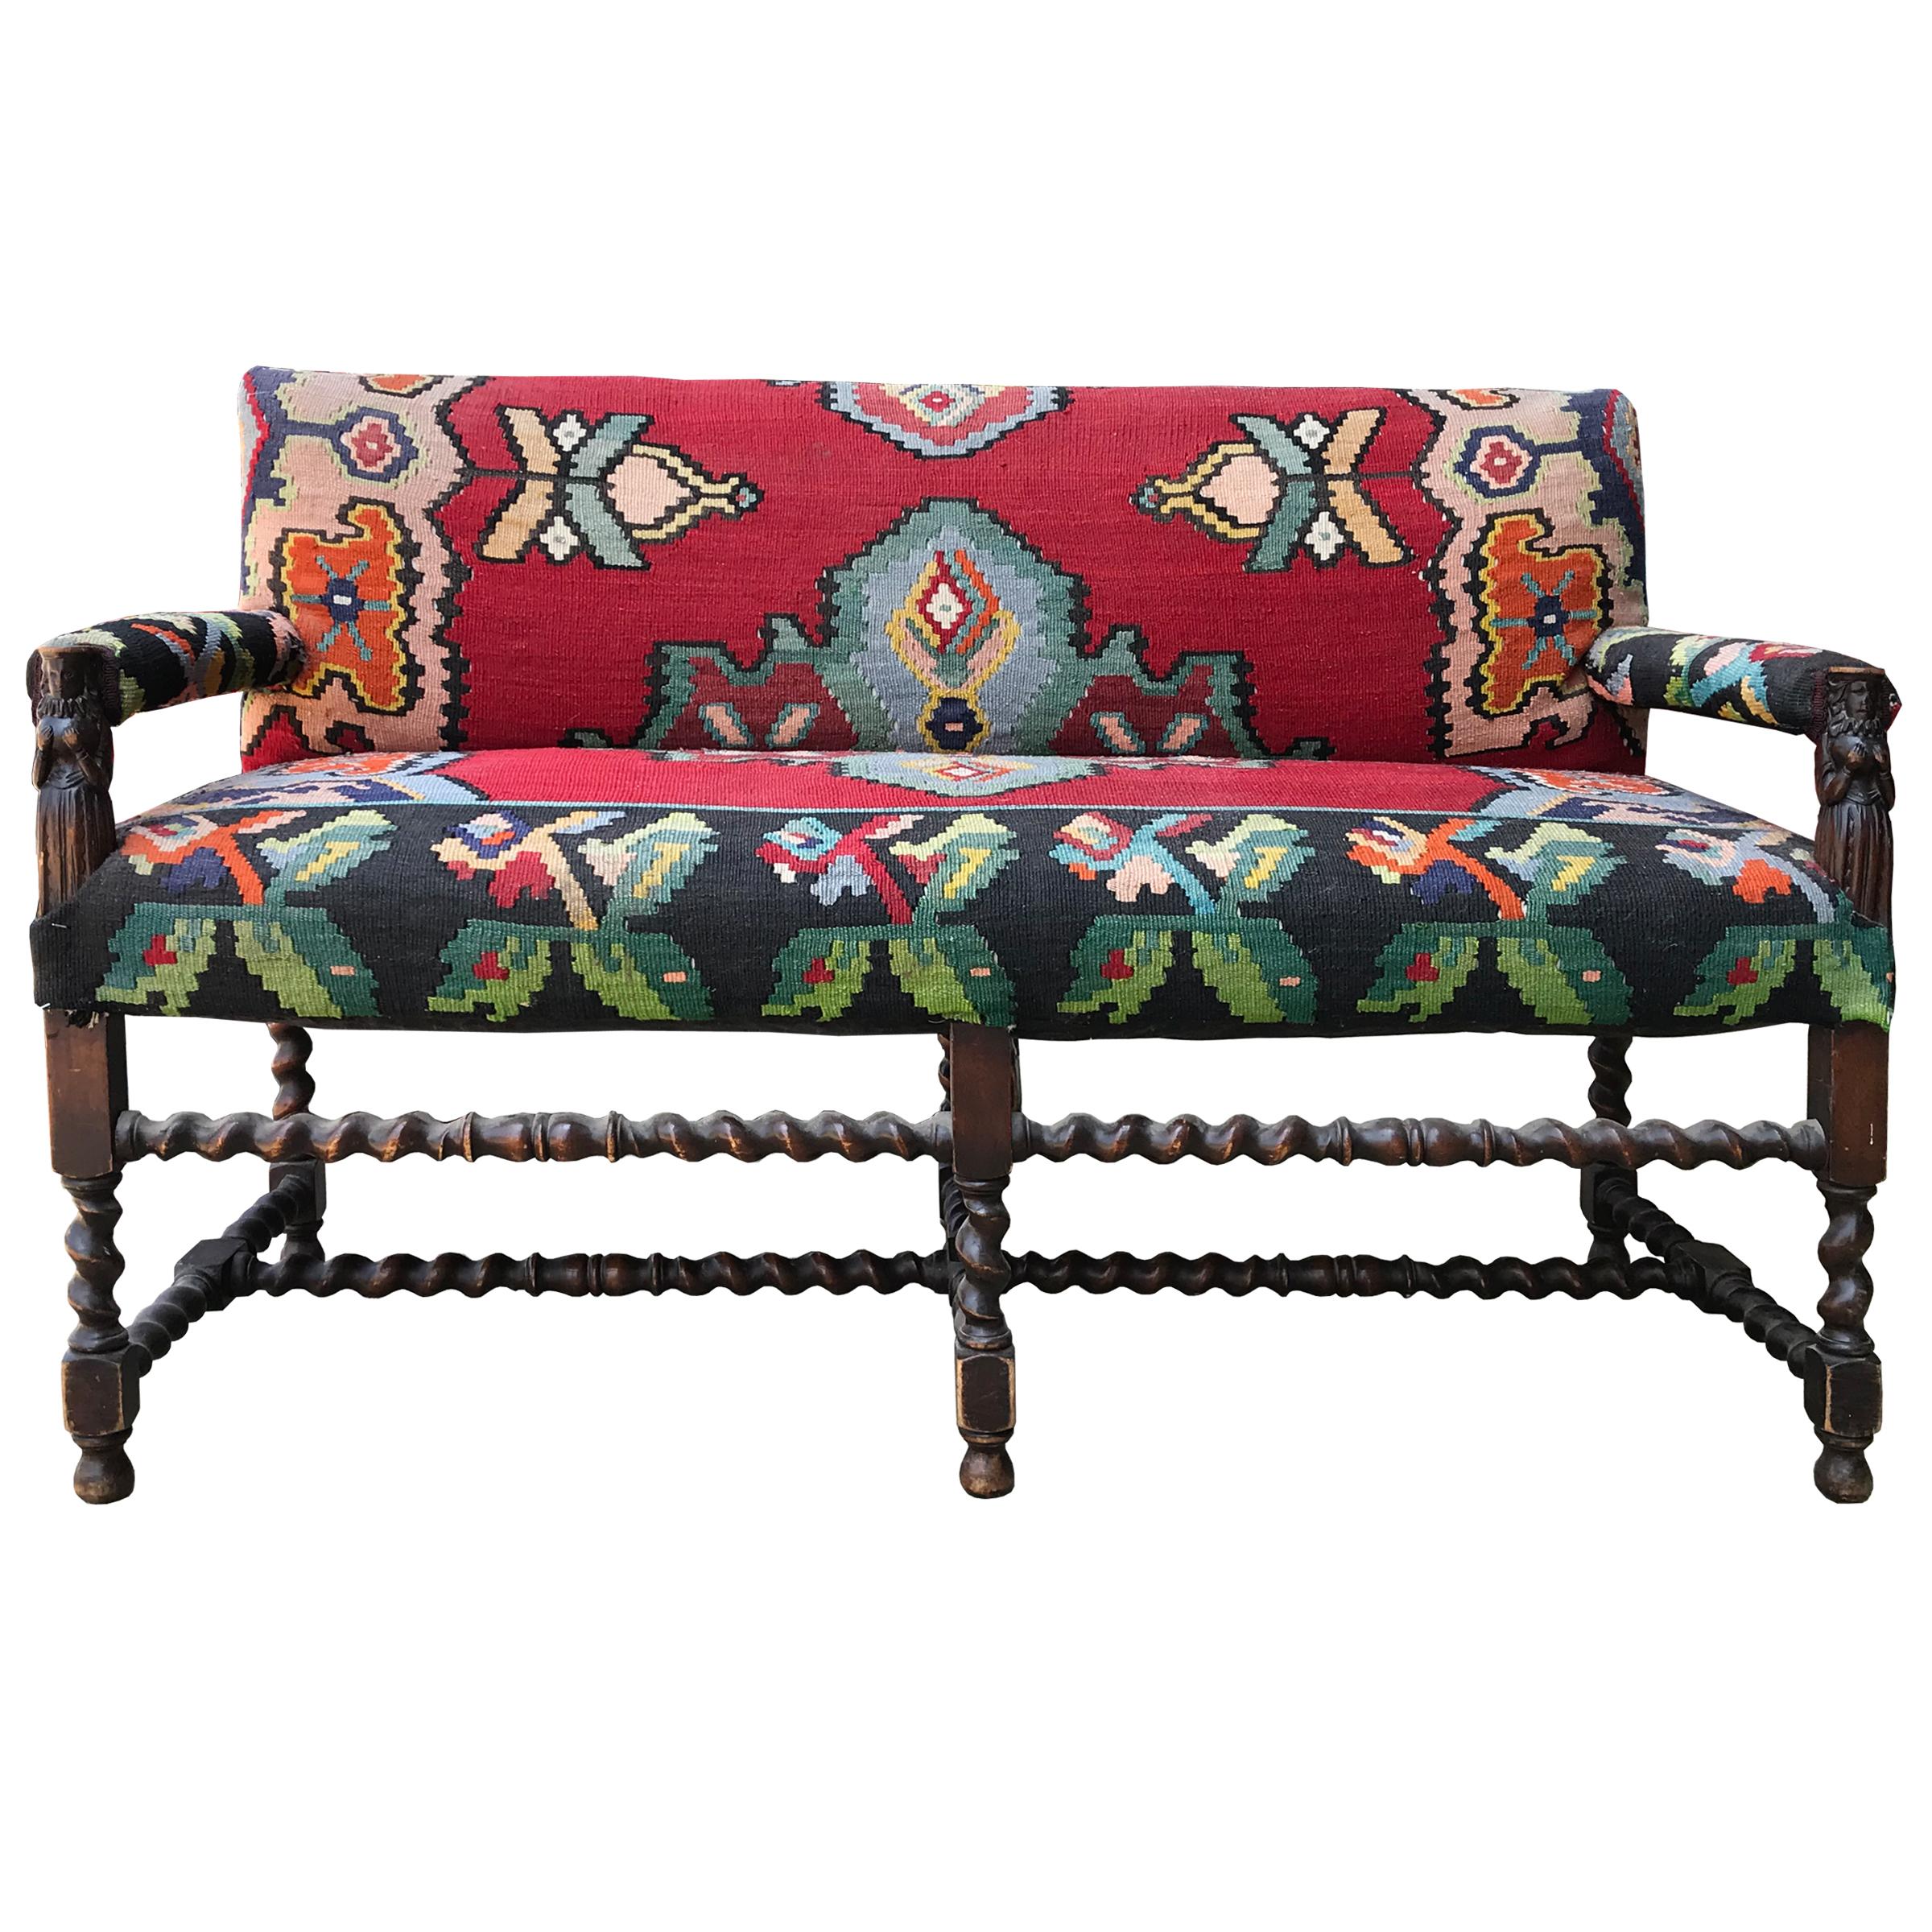 A pair of wonderful 18th century Flemish benches with carved wood barley twist legs and stretchers, figural arm stands depicting women with Elizabethan collars holding their bosoms, and upholstered in matching vintage 20th century Turkish Kilim